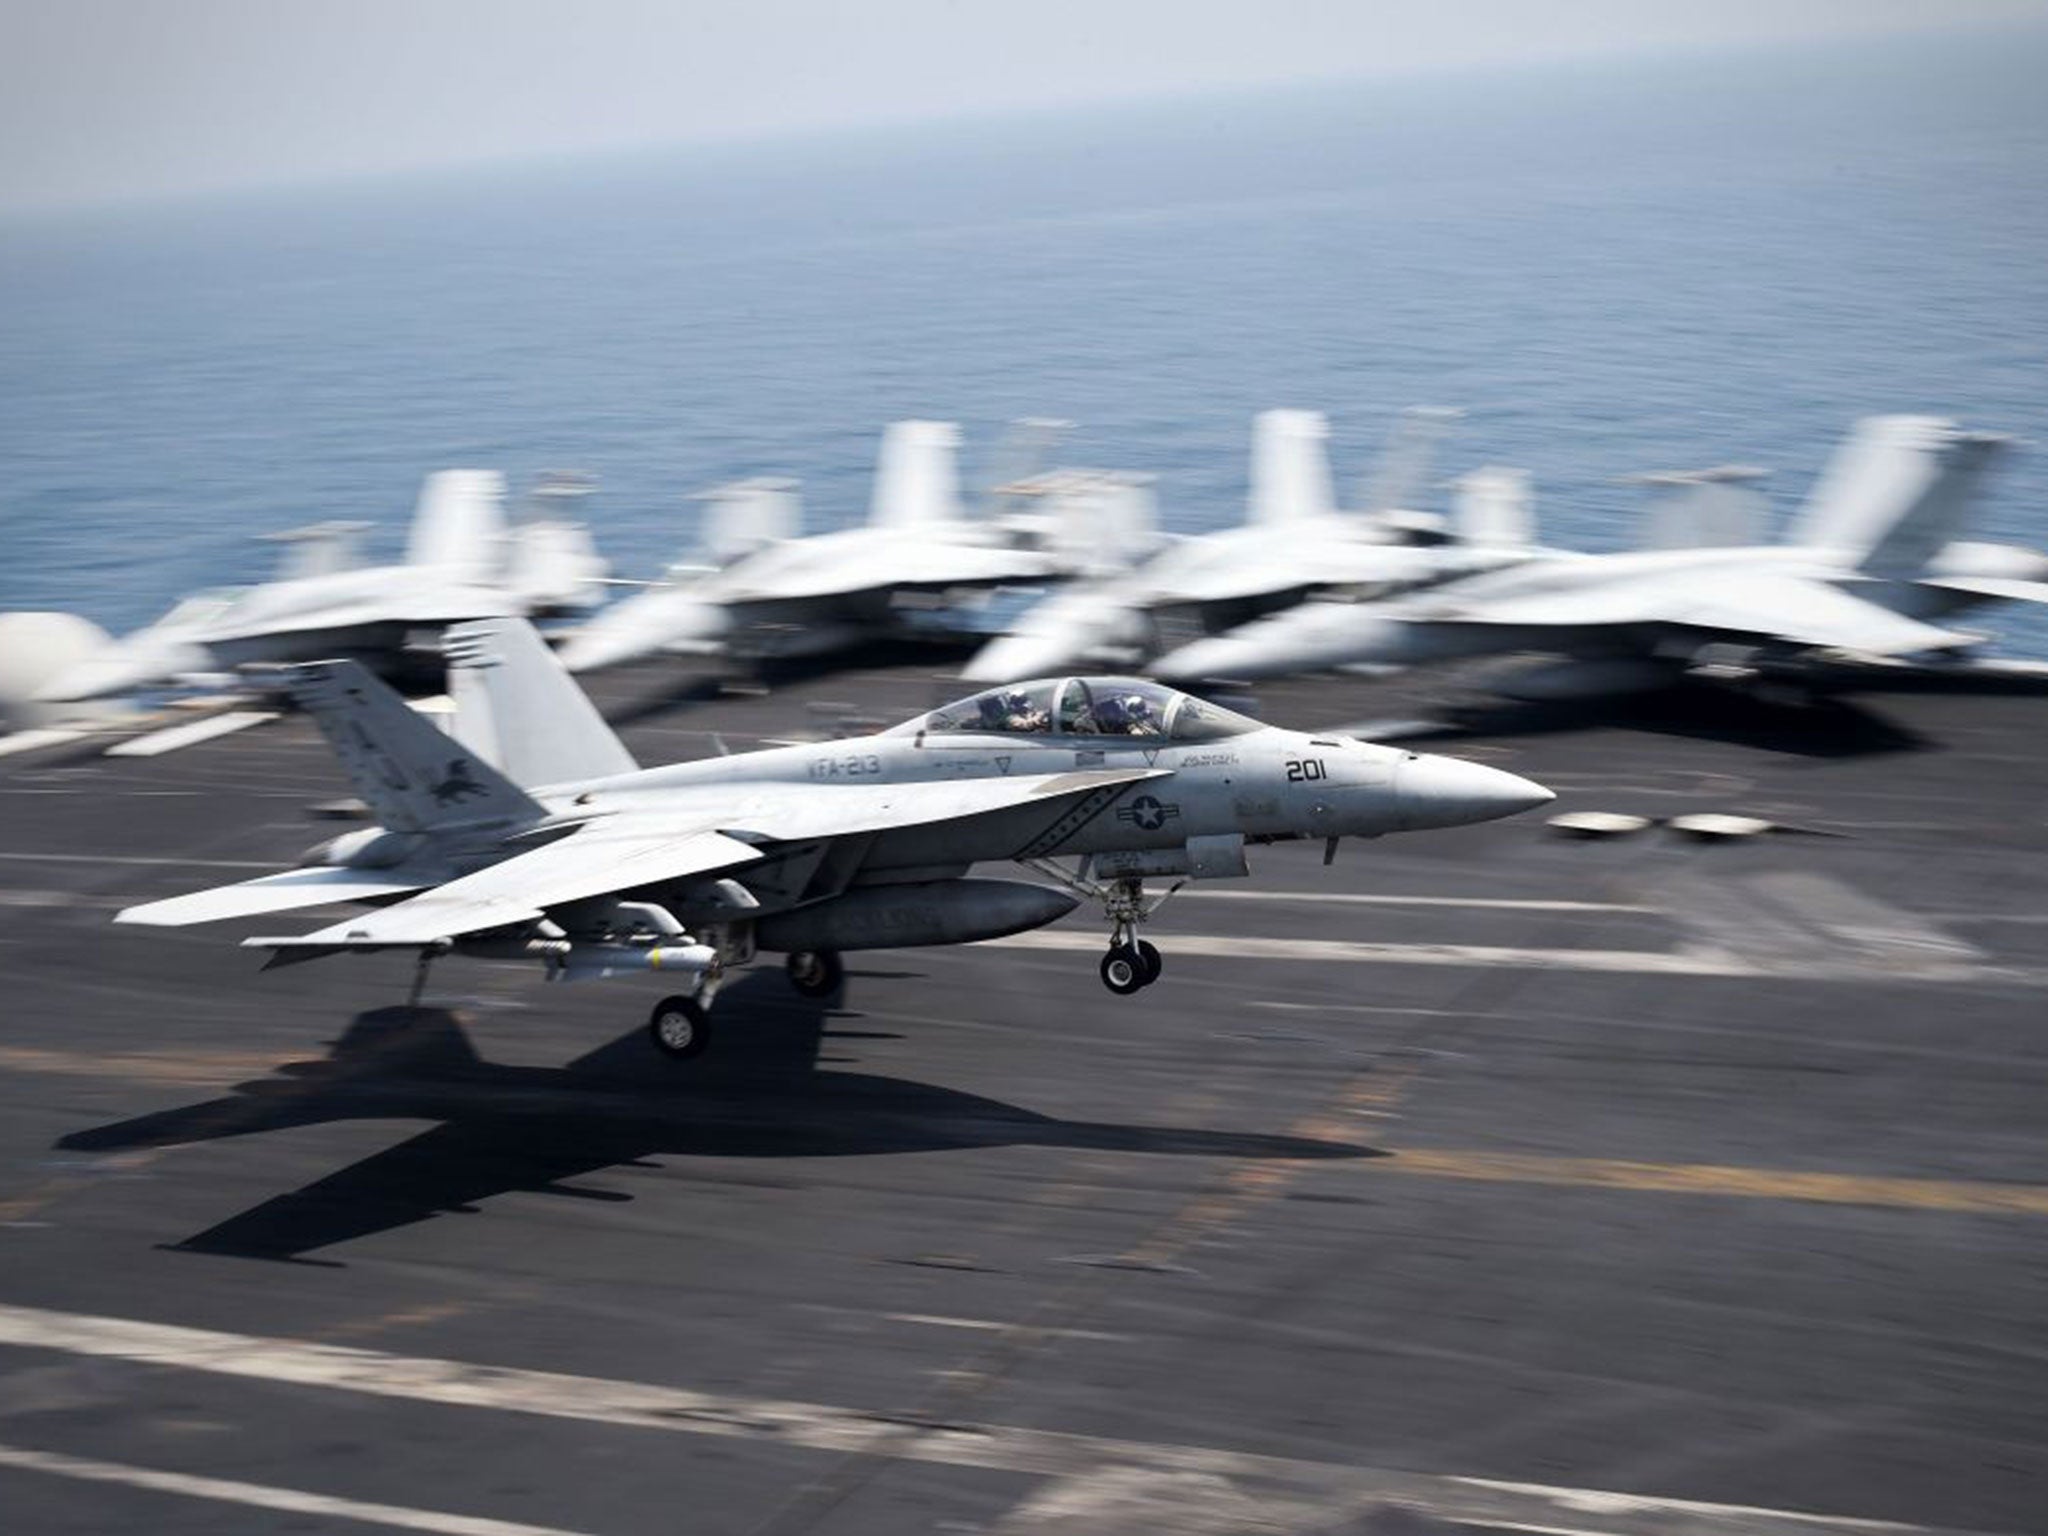 An F/A-18C Hornet coming from Iraq lands on the flight deck of the US navy aircraft carrier USS George H.W. Bush on August 15, 2014 in the Gulf